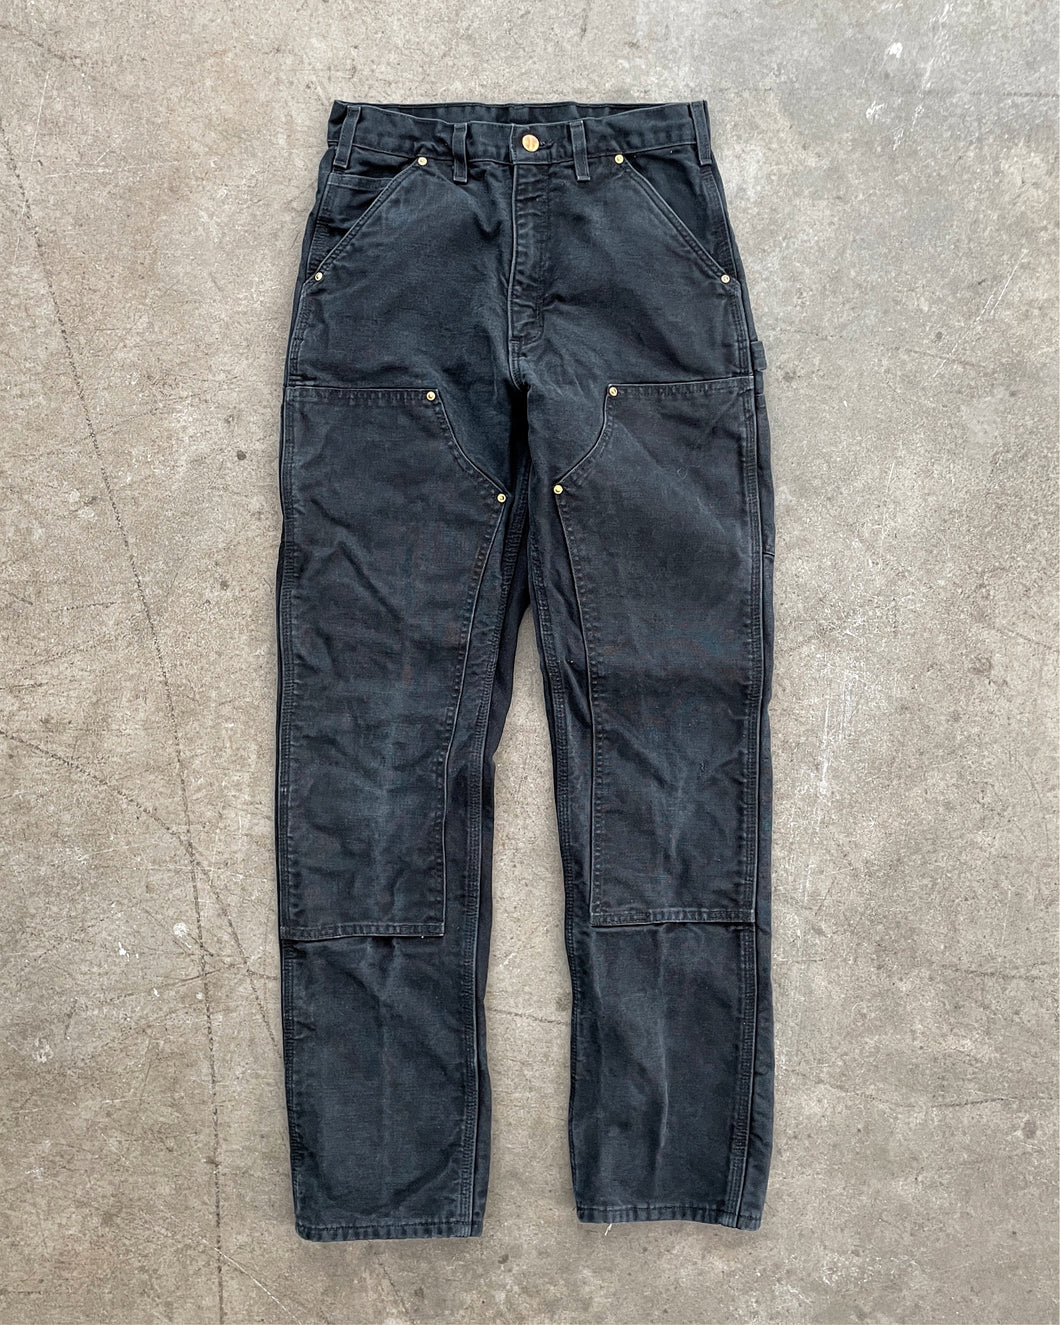 CARHARTT FLANNELL LINED FADED BLACK DOUBLE KNEE WORK PANTS - 1990S